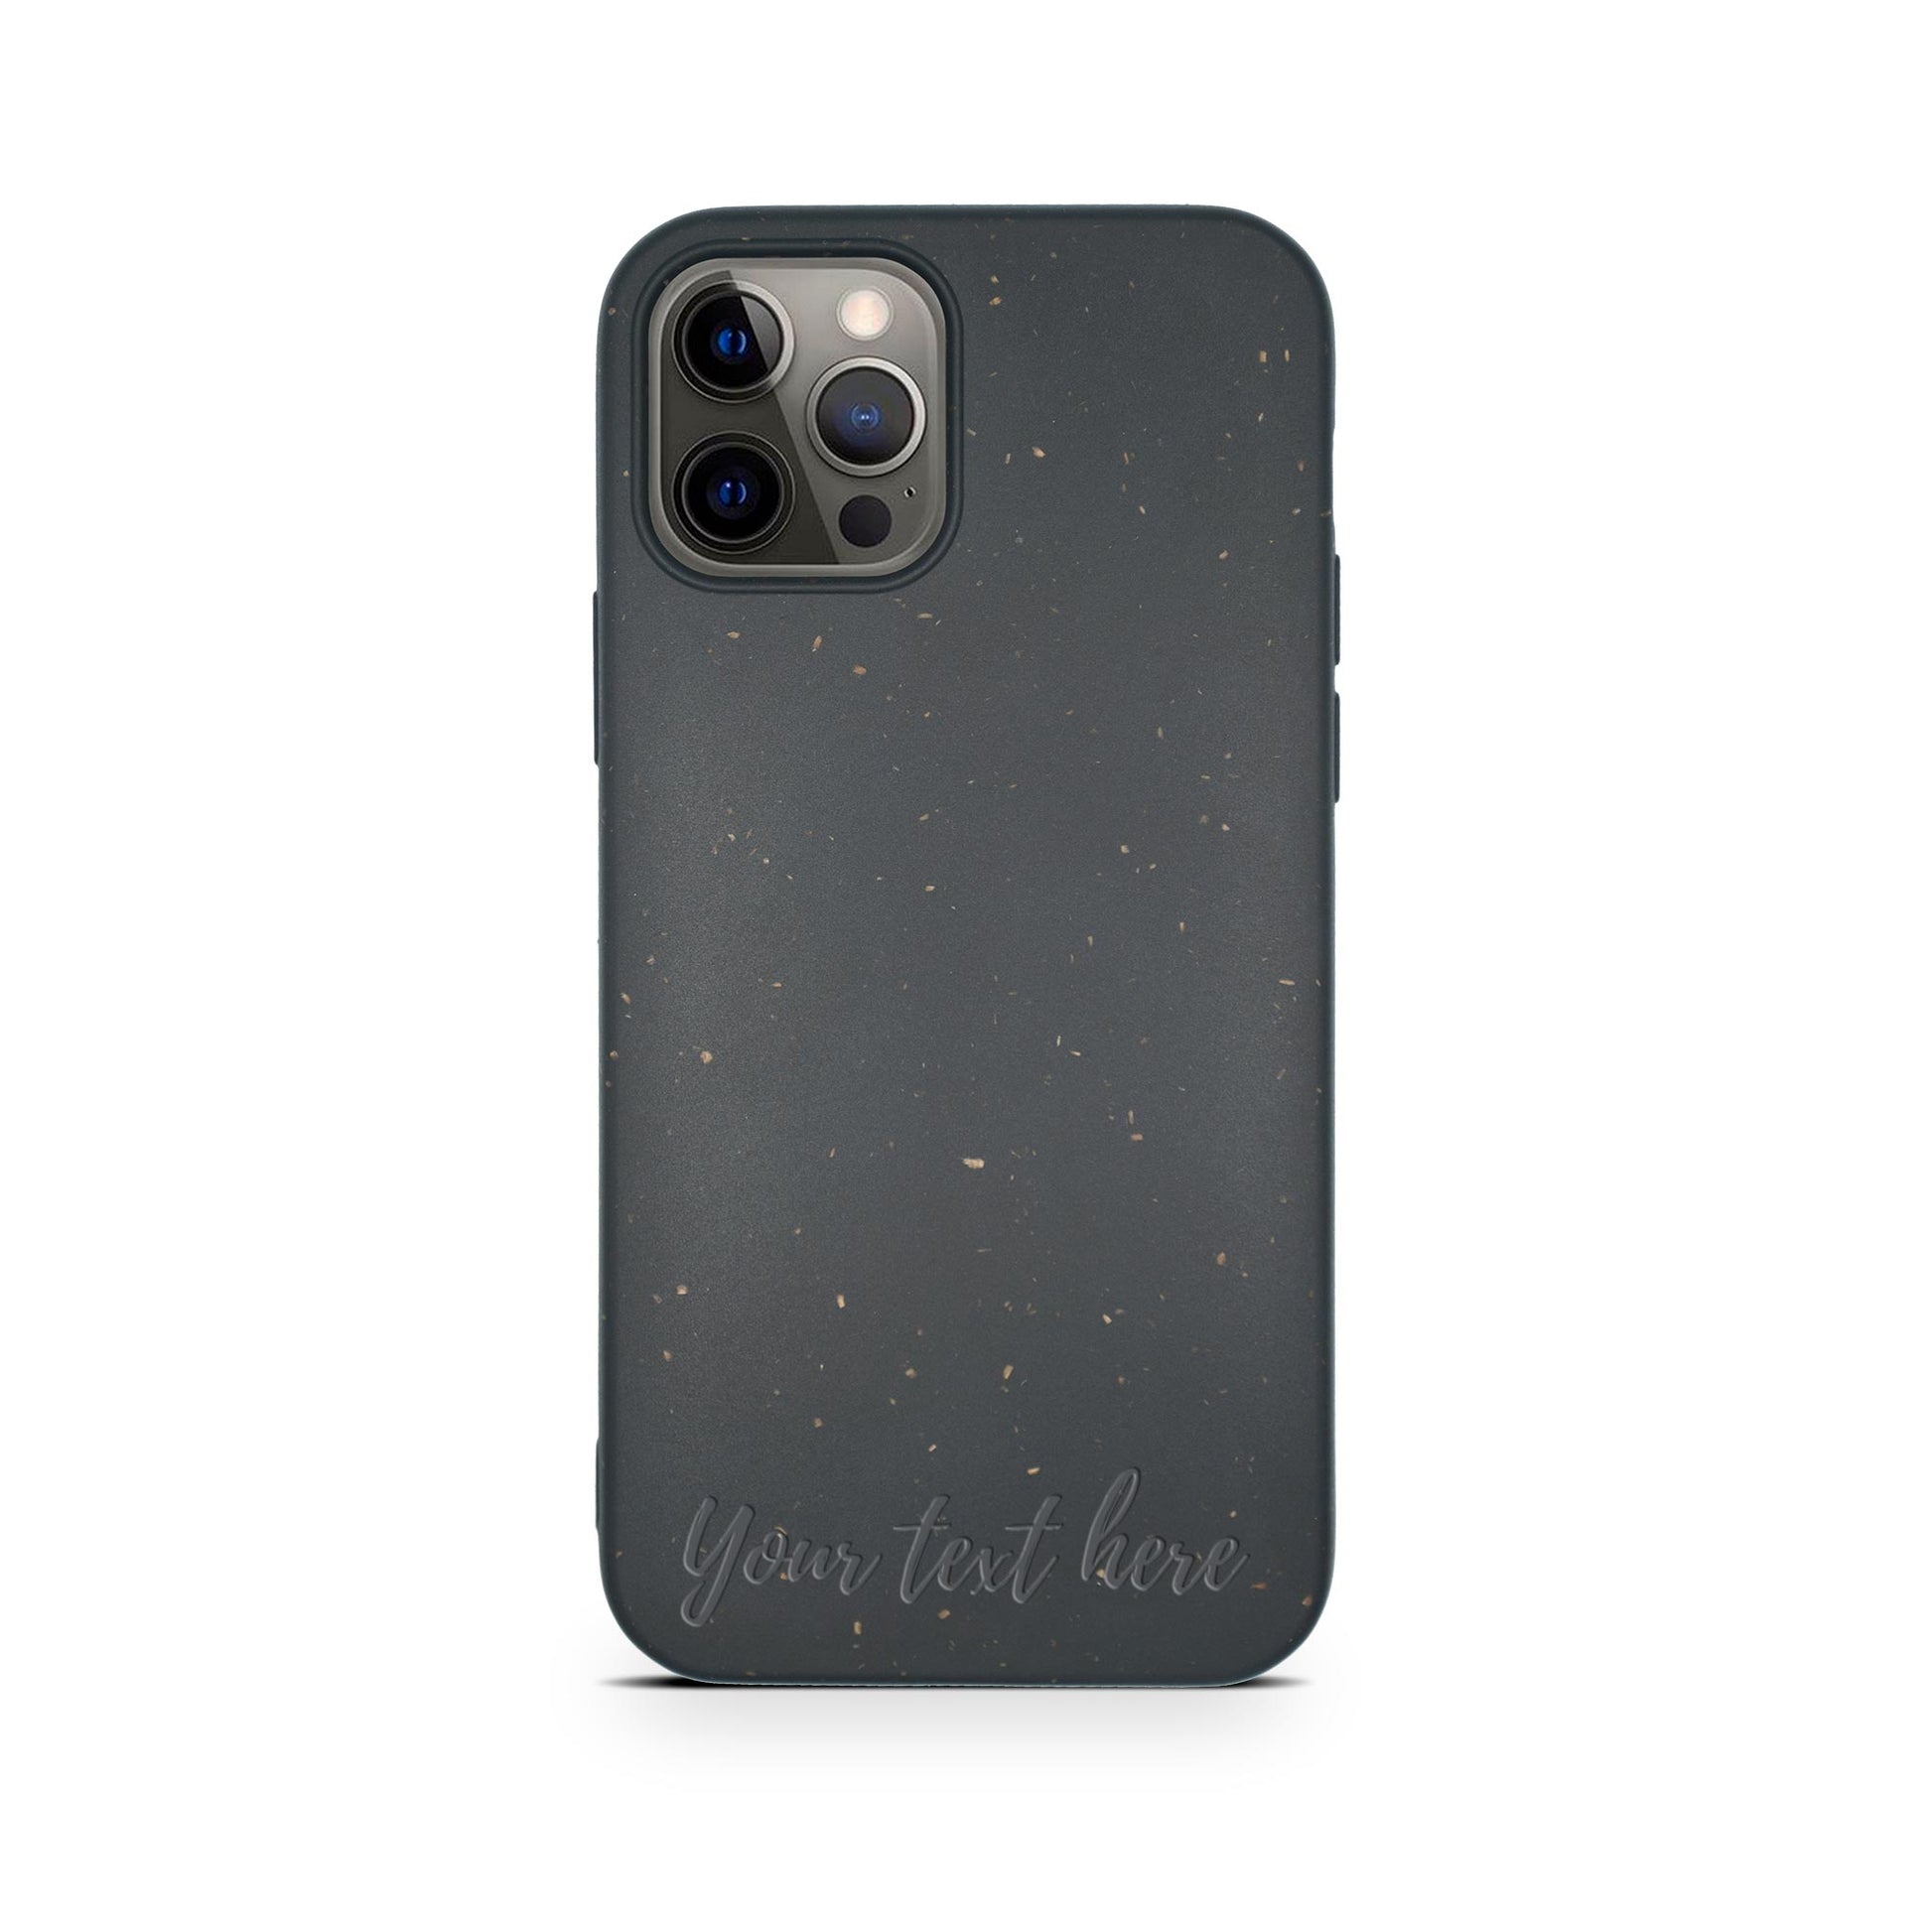 A smartphone with a Tan Lily Biodegradable Personalized iPhone Case - Black and triple camera lenses, featuring customizable text "Your text here" on the case.